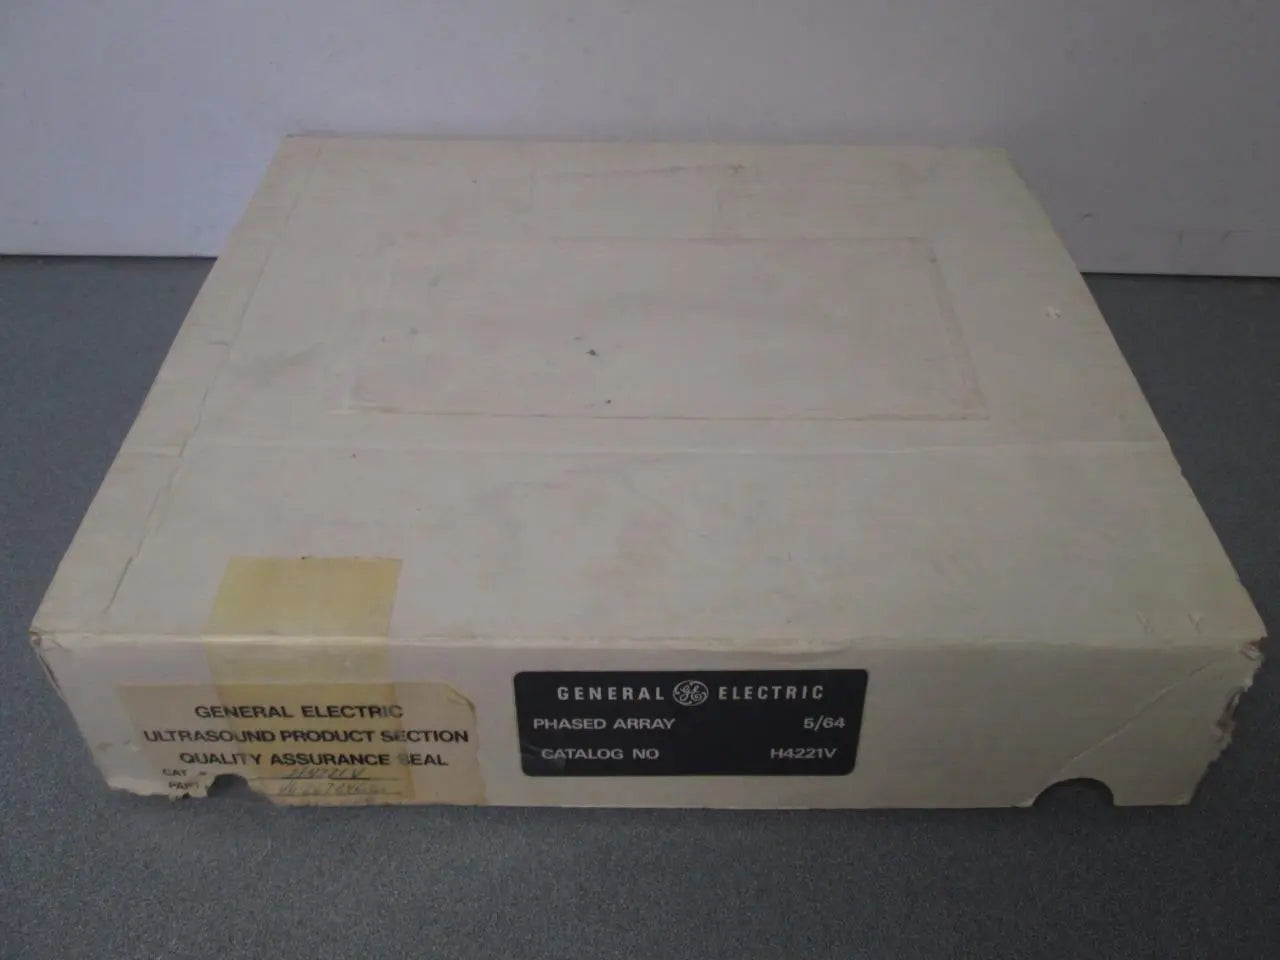 GE General Electric 46-267246G1 (5/64) 5.0 MHZ Ultra Sound Transducer Probe